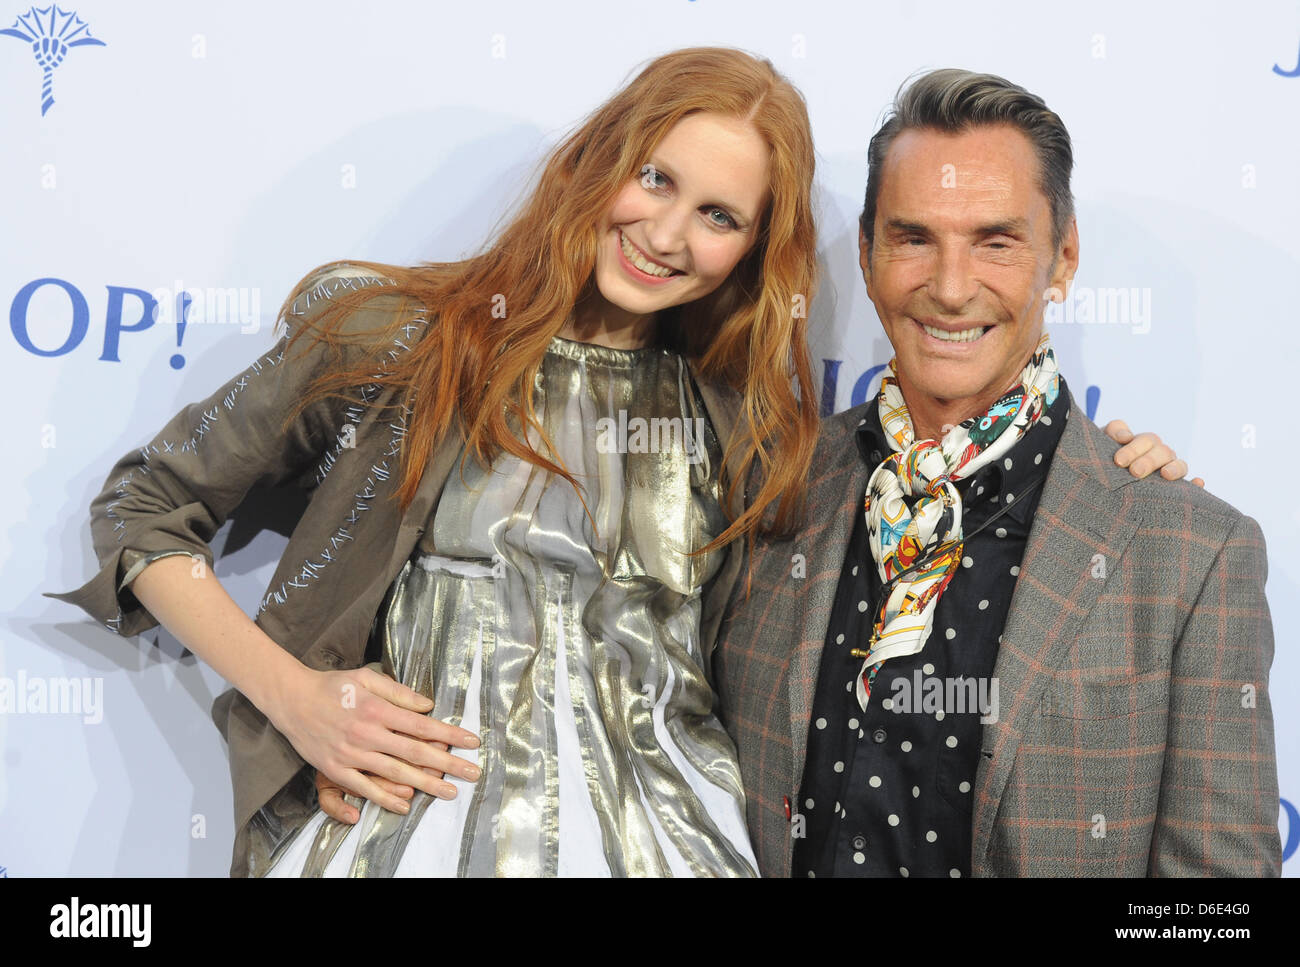 Designer Wolfgang Joop and model Sara Sperling arrive at the Joop  presentation during Fashion Week in Berlin, Germany, 18 January 2012. The  presentation of the Autumn/Winter 2012/2013 collections takes place from 18